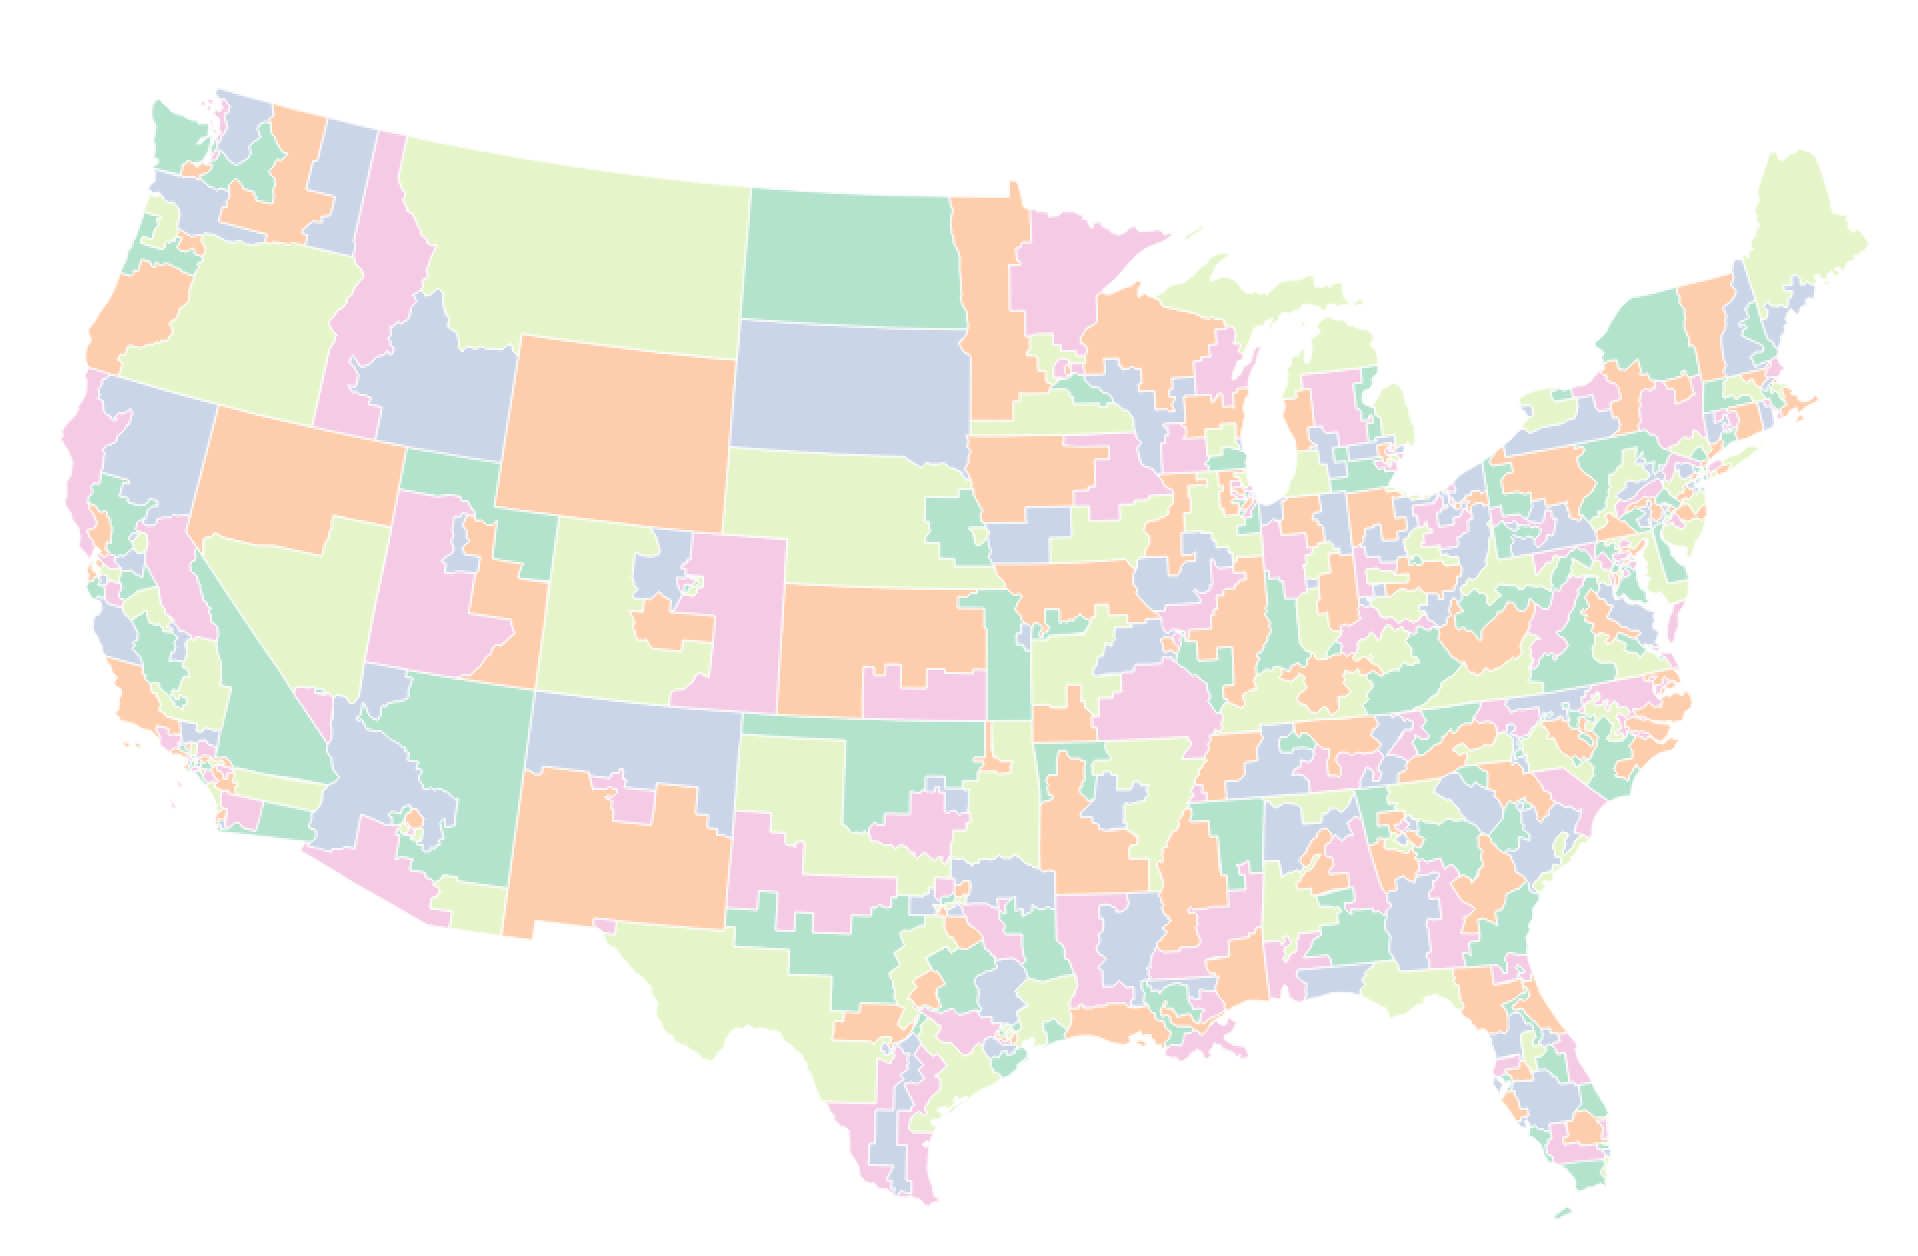 congressional districts in five colors